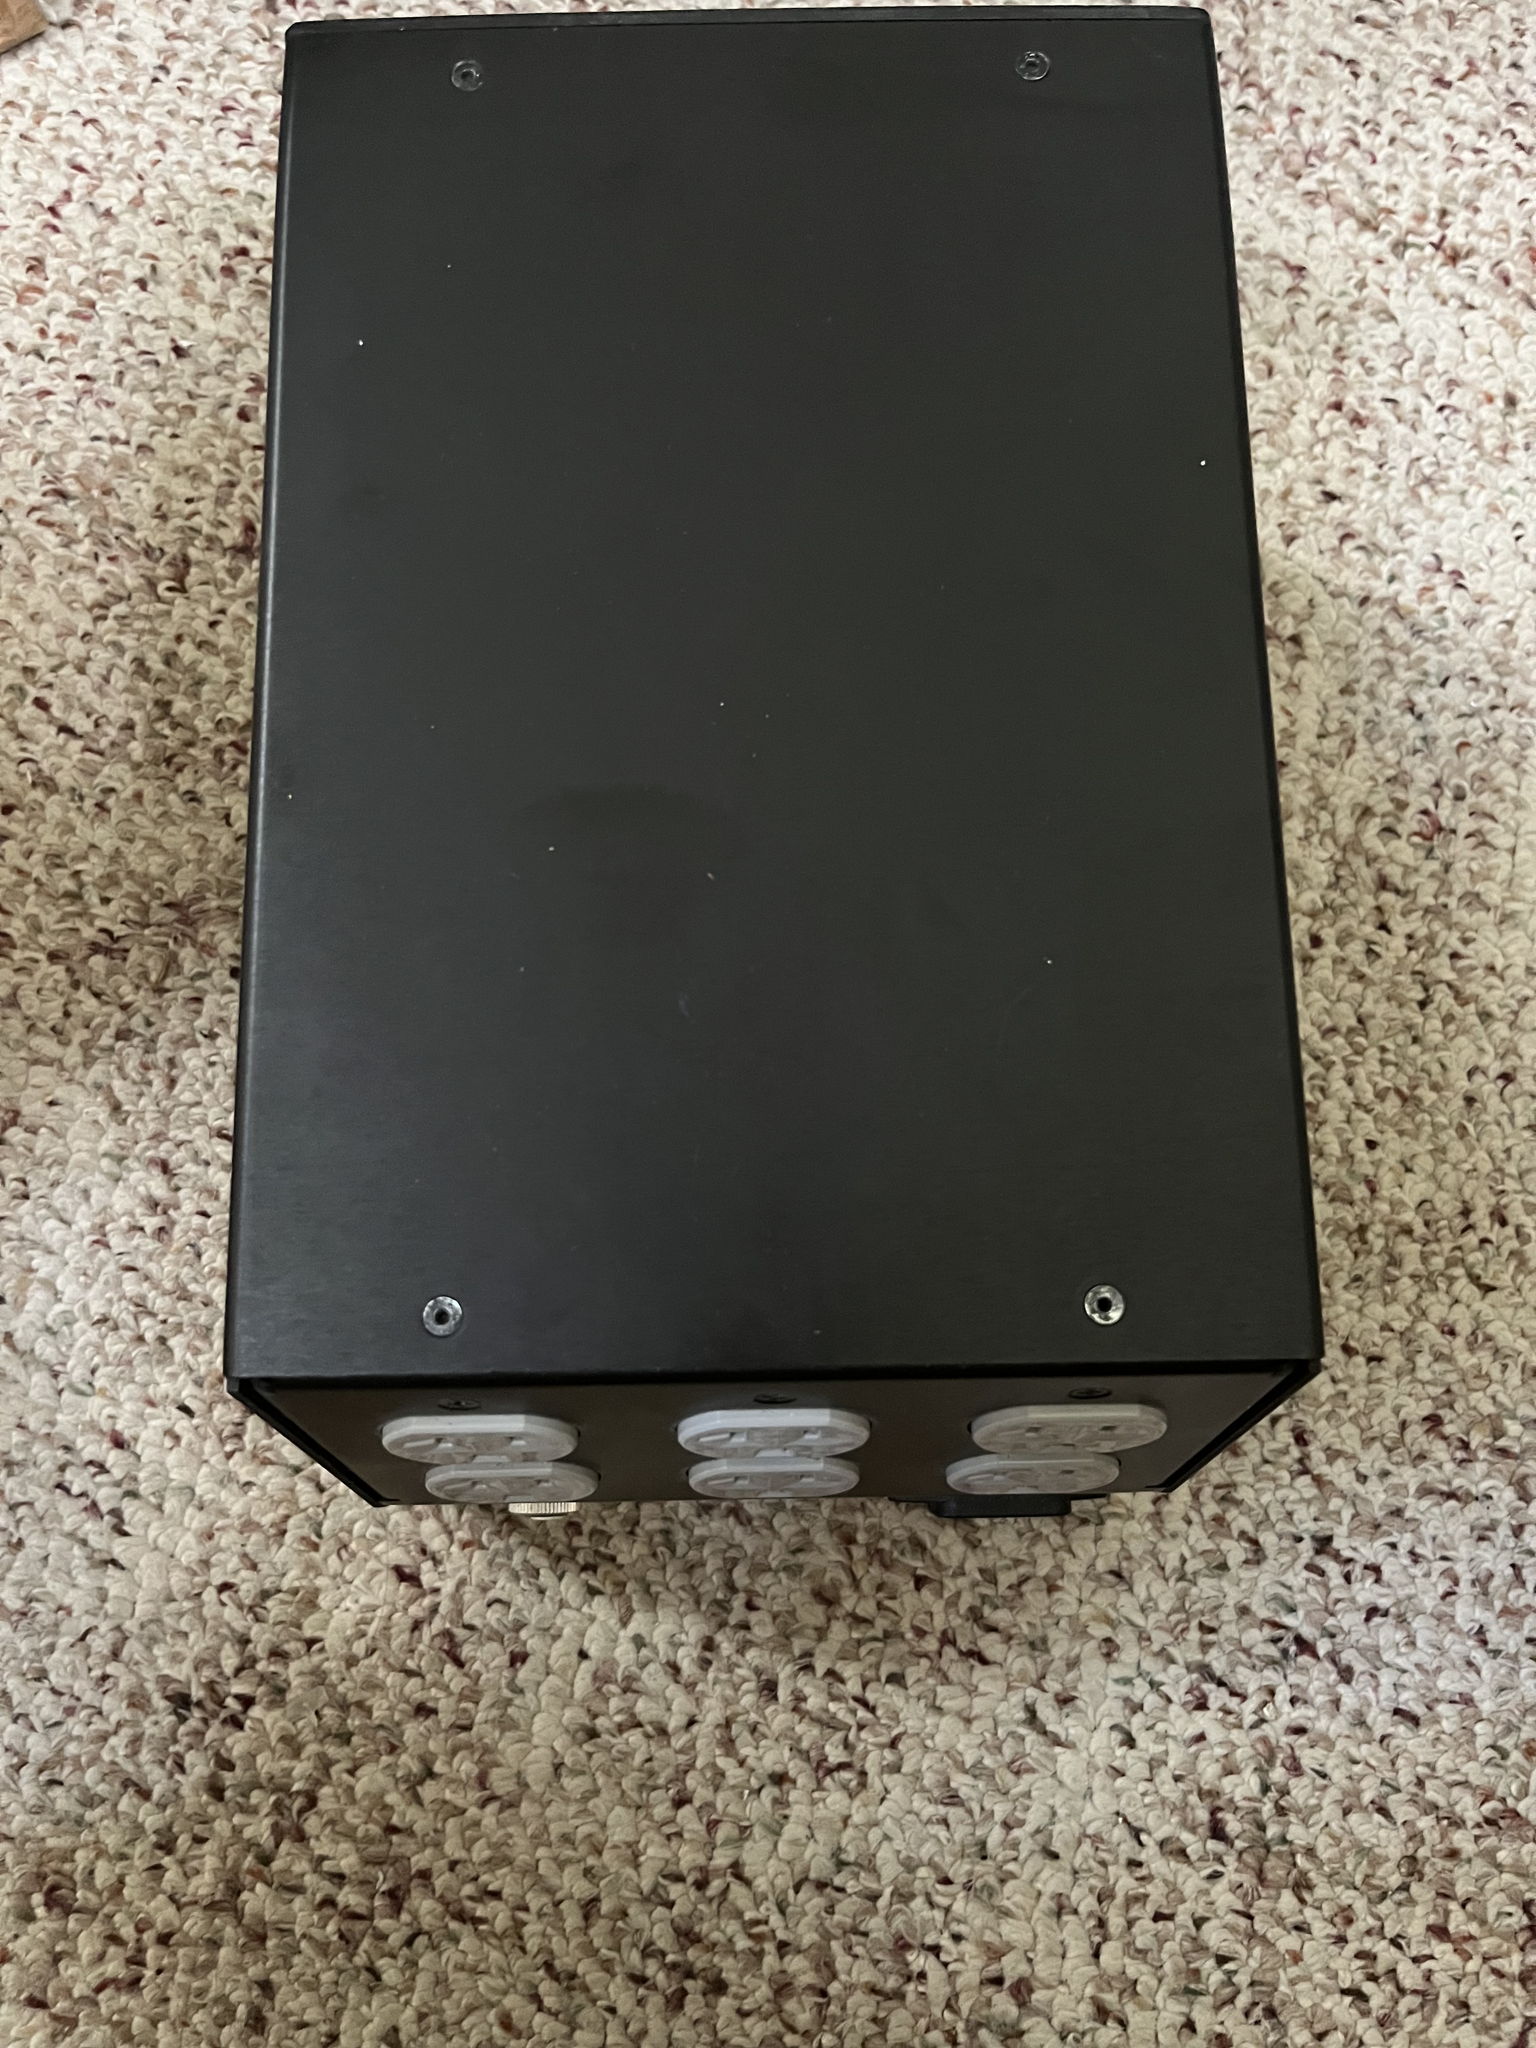 Running Springs Audio Haley power conditioner with free... 8